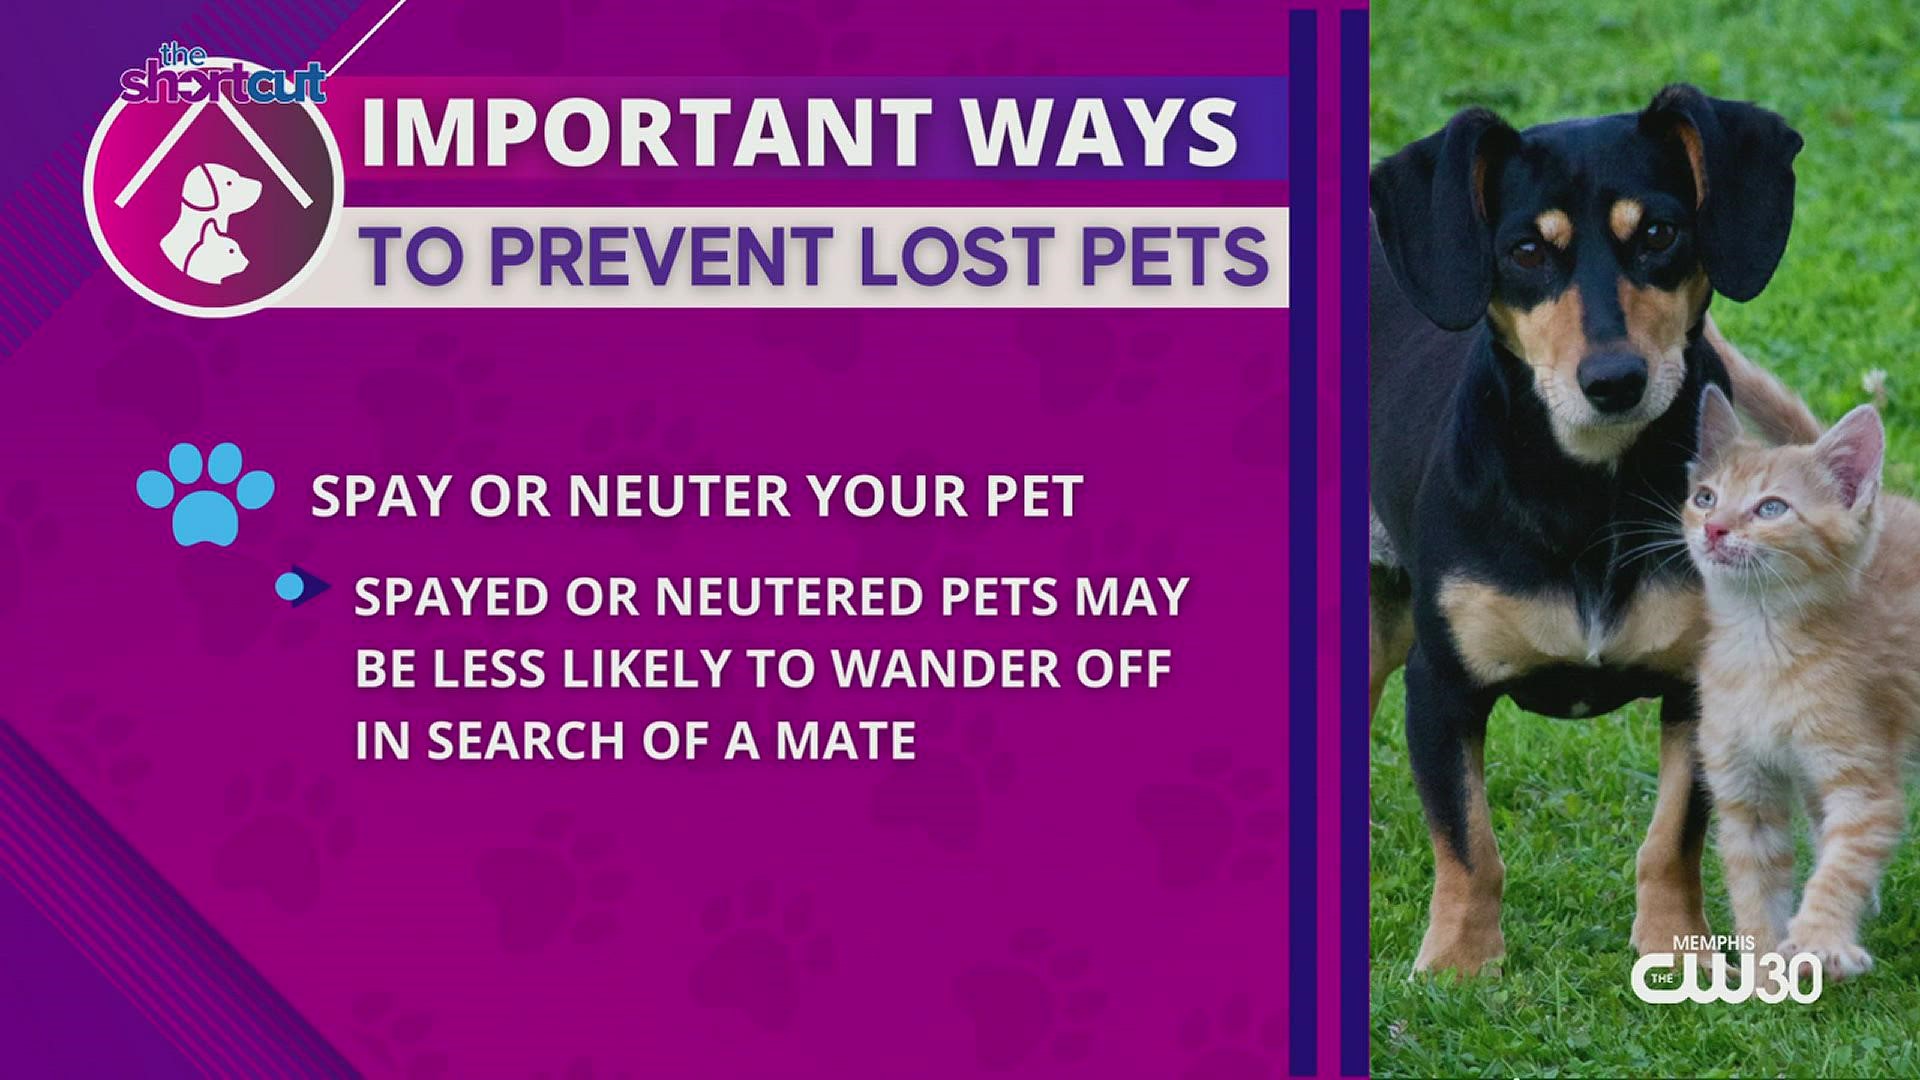 Don't wait until it's too late! Join Sydney Neely of "The Shortcut" and Katie Pemberton of Memphis Animal Services for tips on how to prevent lost pets and more!